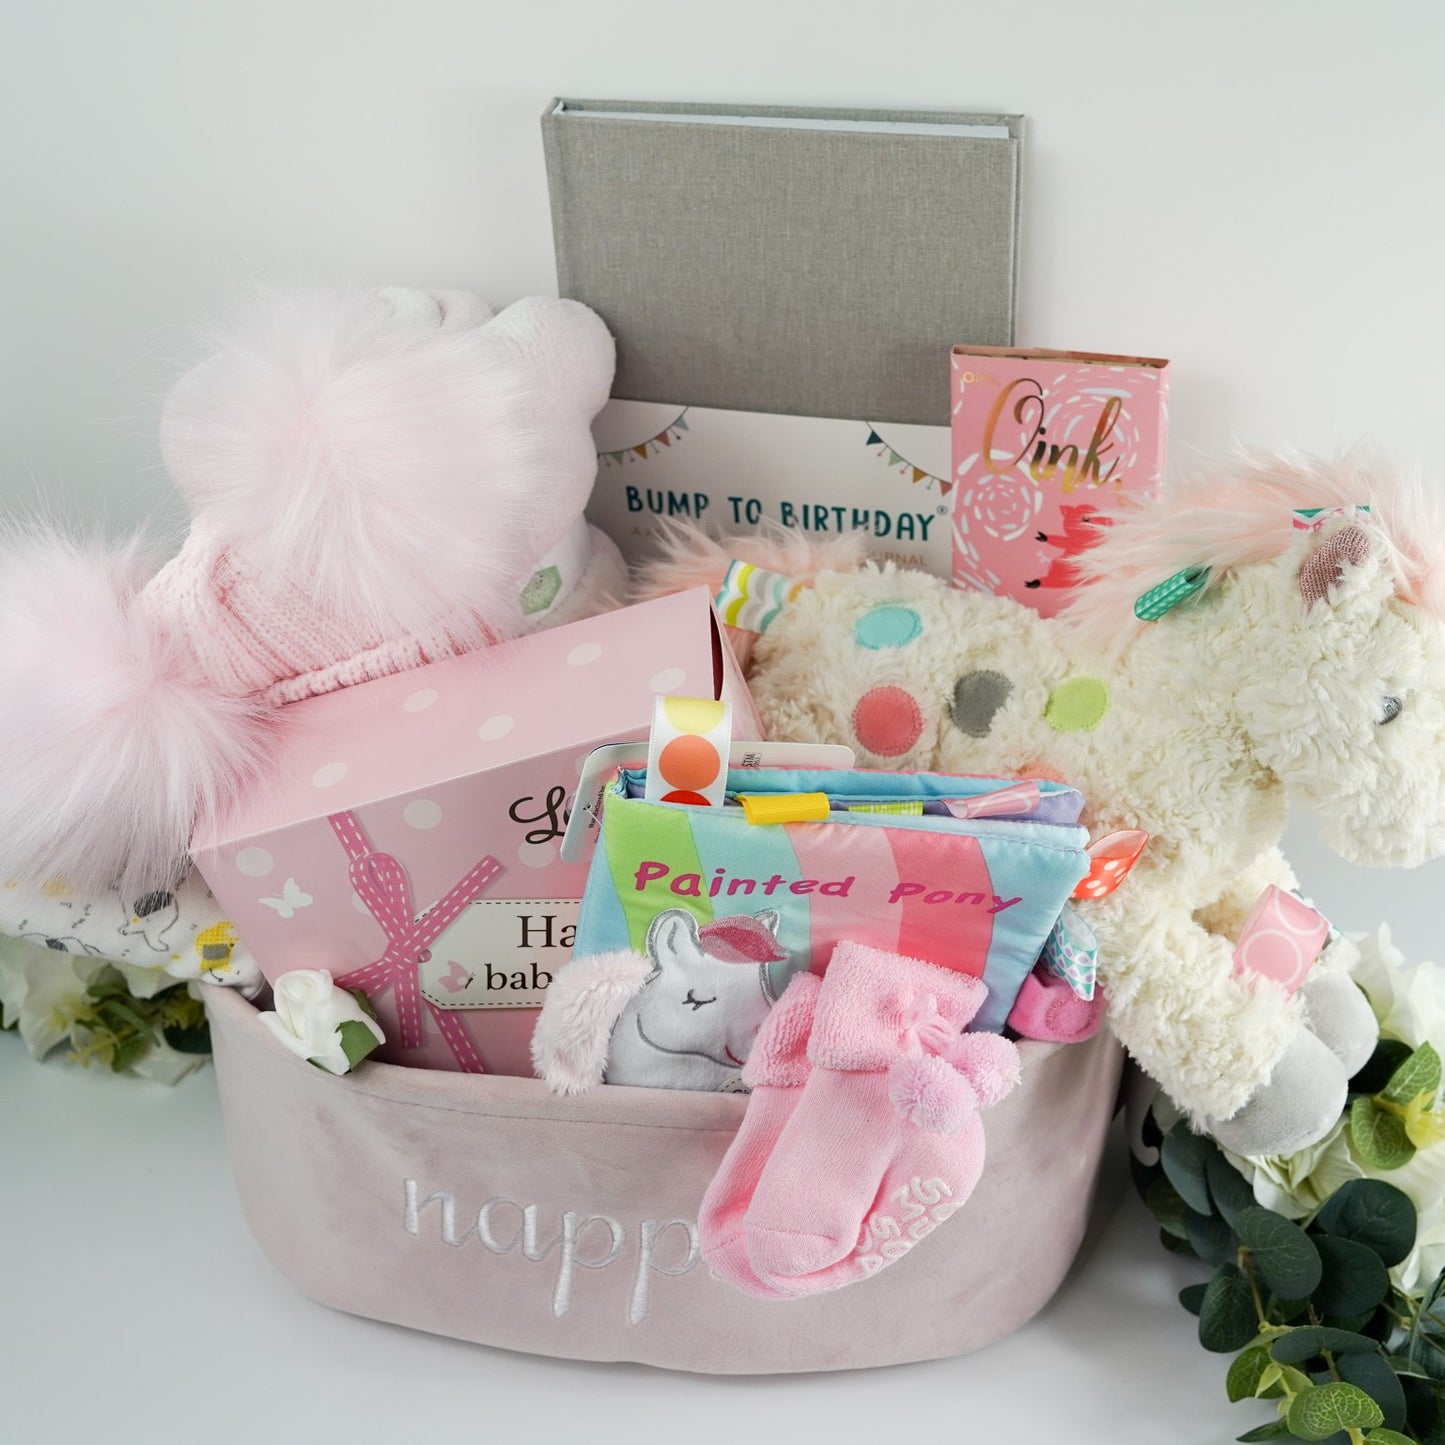 Luxury Mum To Be Hamper Gifts, Baby Shower Gifts,  Pink Baby Girl Nappy Caddy, Pregnancy Journal, Baby Blanket, Mum To Be toiletries, Baby toiletries, Corporate Baby Gift